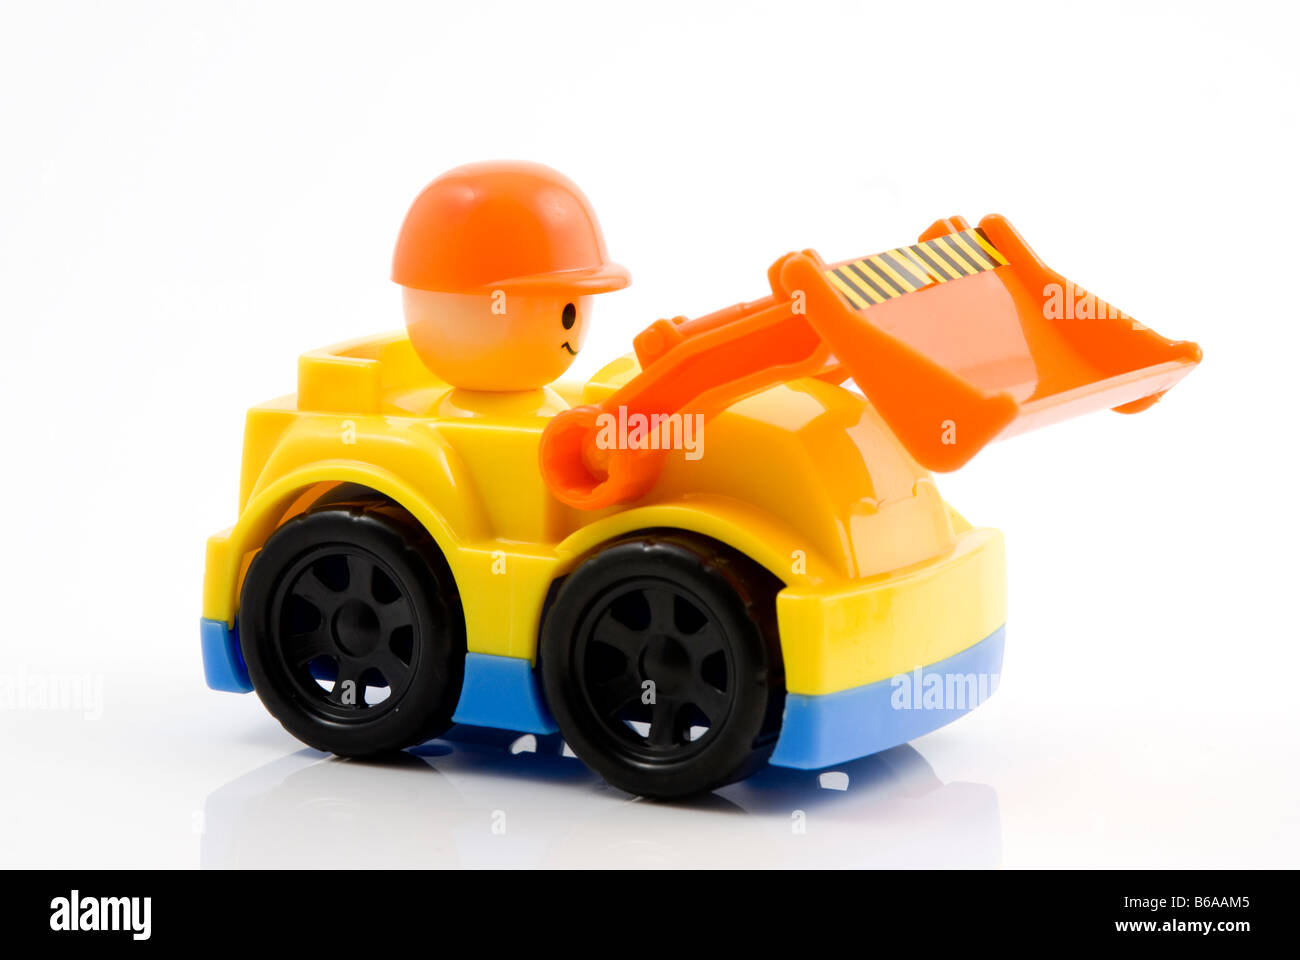 toy JCB digger truck Stock Photo